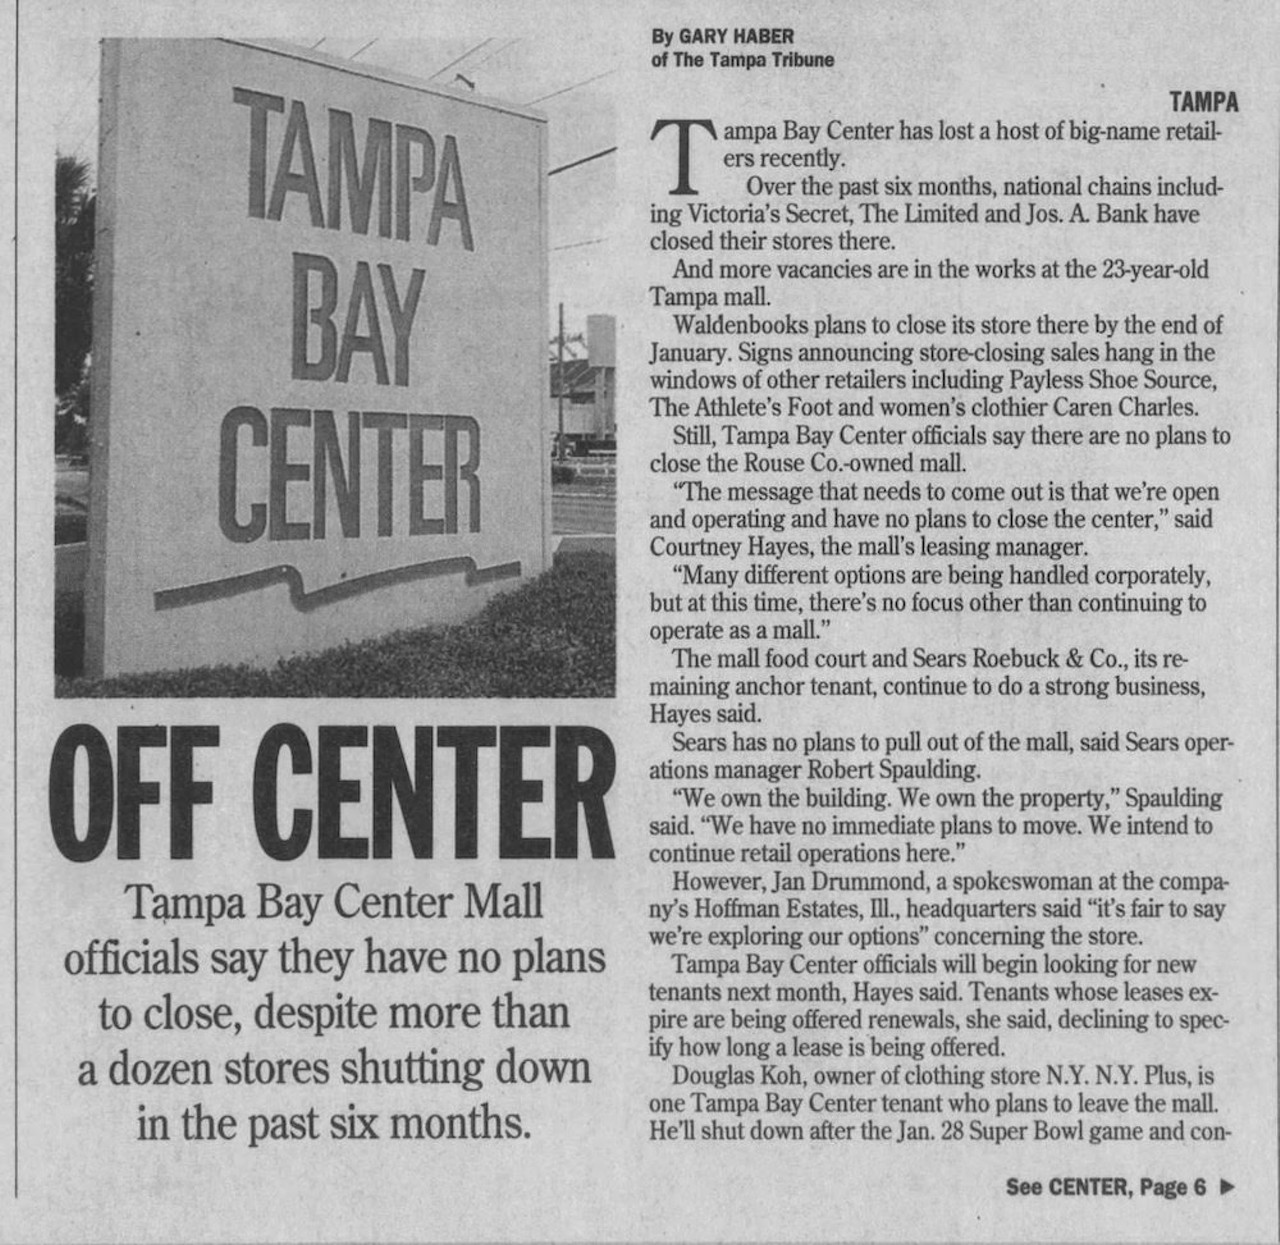 Tampa Bay Center
Before International Plaza and Hyde Park Village, there was the Tampa Bay Center, a two-story shopping mall with an Orange Julius, plus a cinema that opened in 1976. After International’s opening in 2001, many stores transferred out of the Bay Center and forced it to close. The empty mall was demolished in 2005 and the Tampa Bay Buccaneers’ training facility now sits atop its grave.
Photo via Tampa Tribune Jan. 2001/Newspapers.com